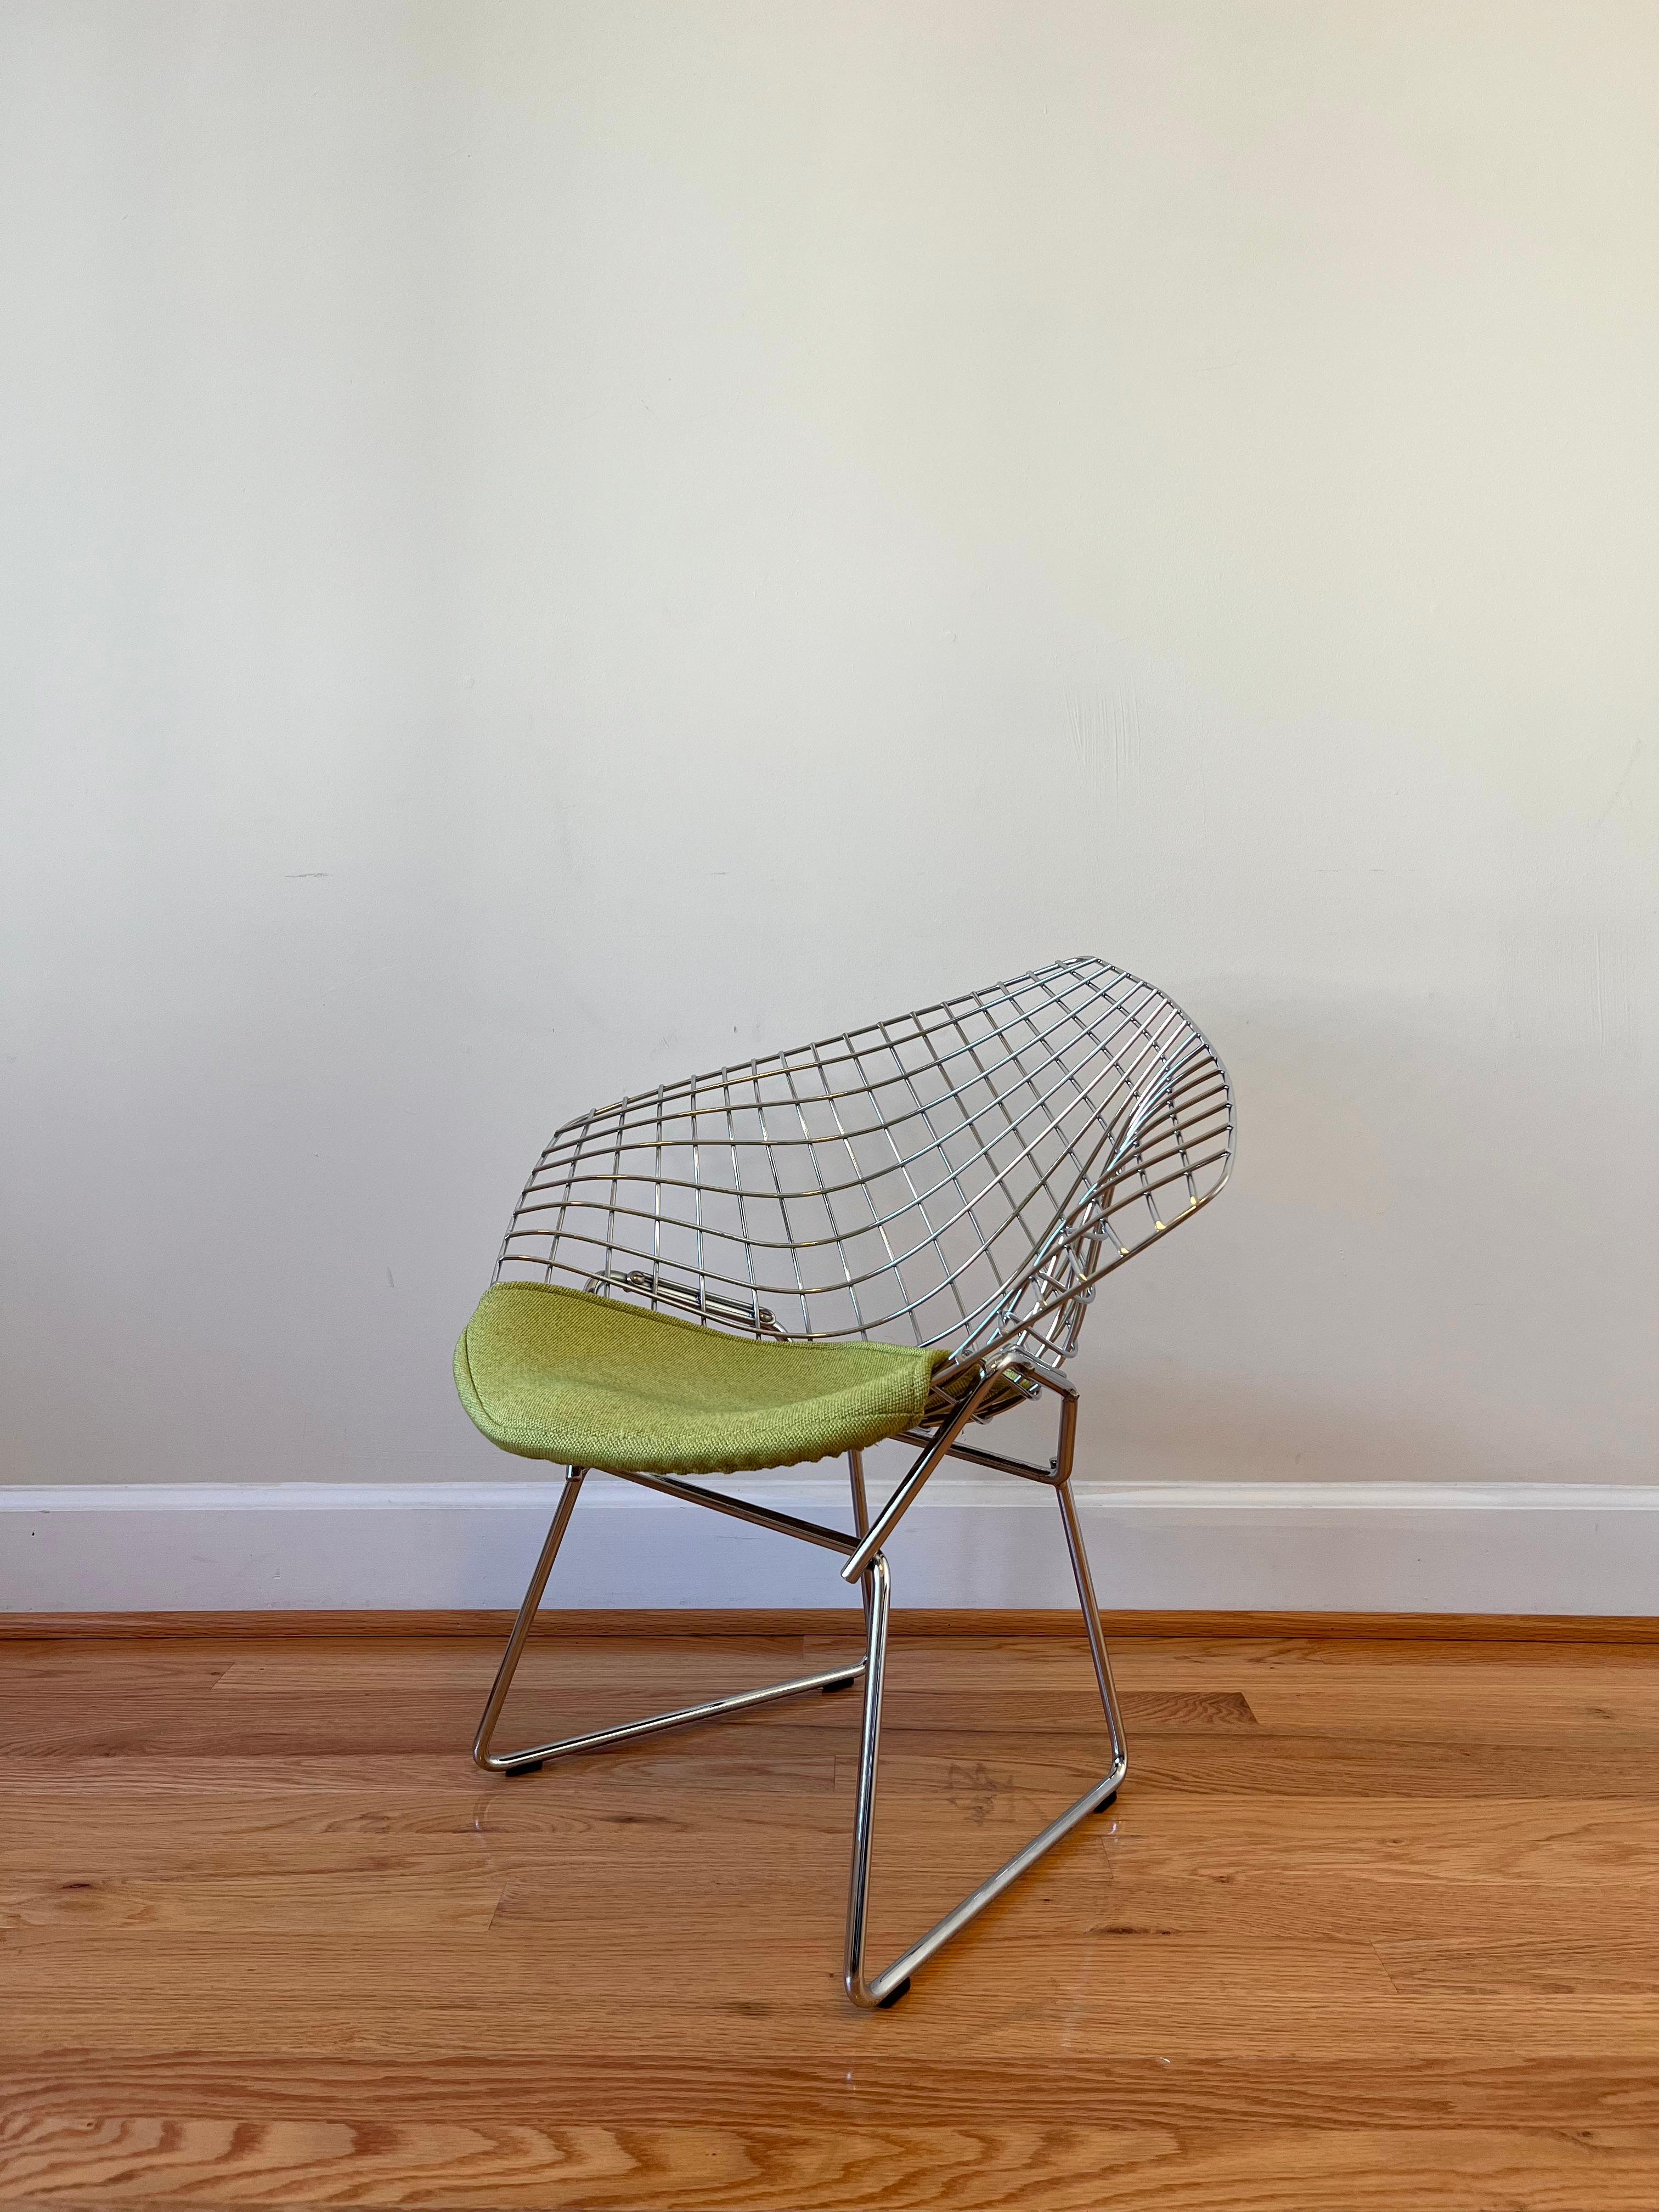 This scaled-down Diamond Chair brings the playful spirit and organic forms of Harry Bertoia to your child’s playroom. 

Harry Bertoia’s wire chairs are among the most recognized achievements of mid-century modern design and a perfect introduction